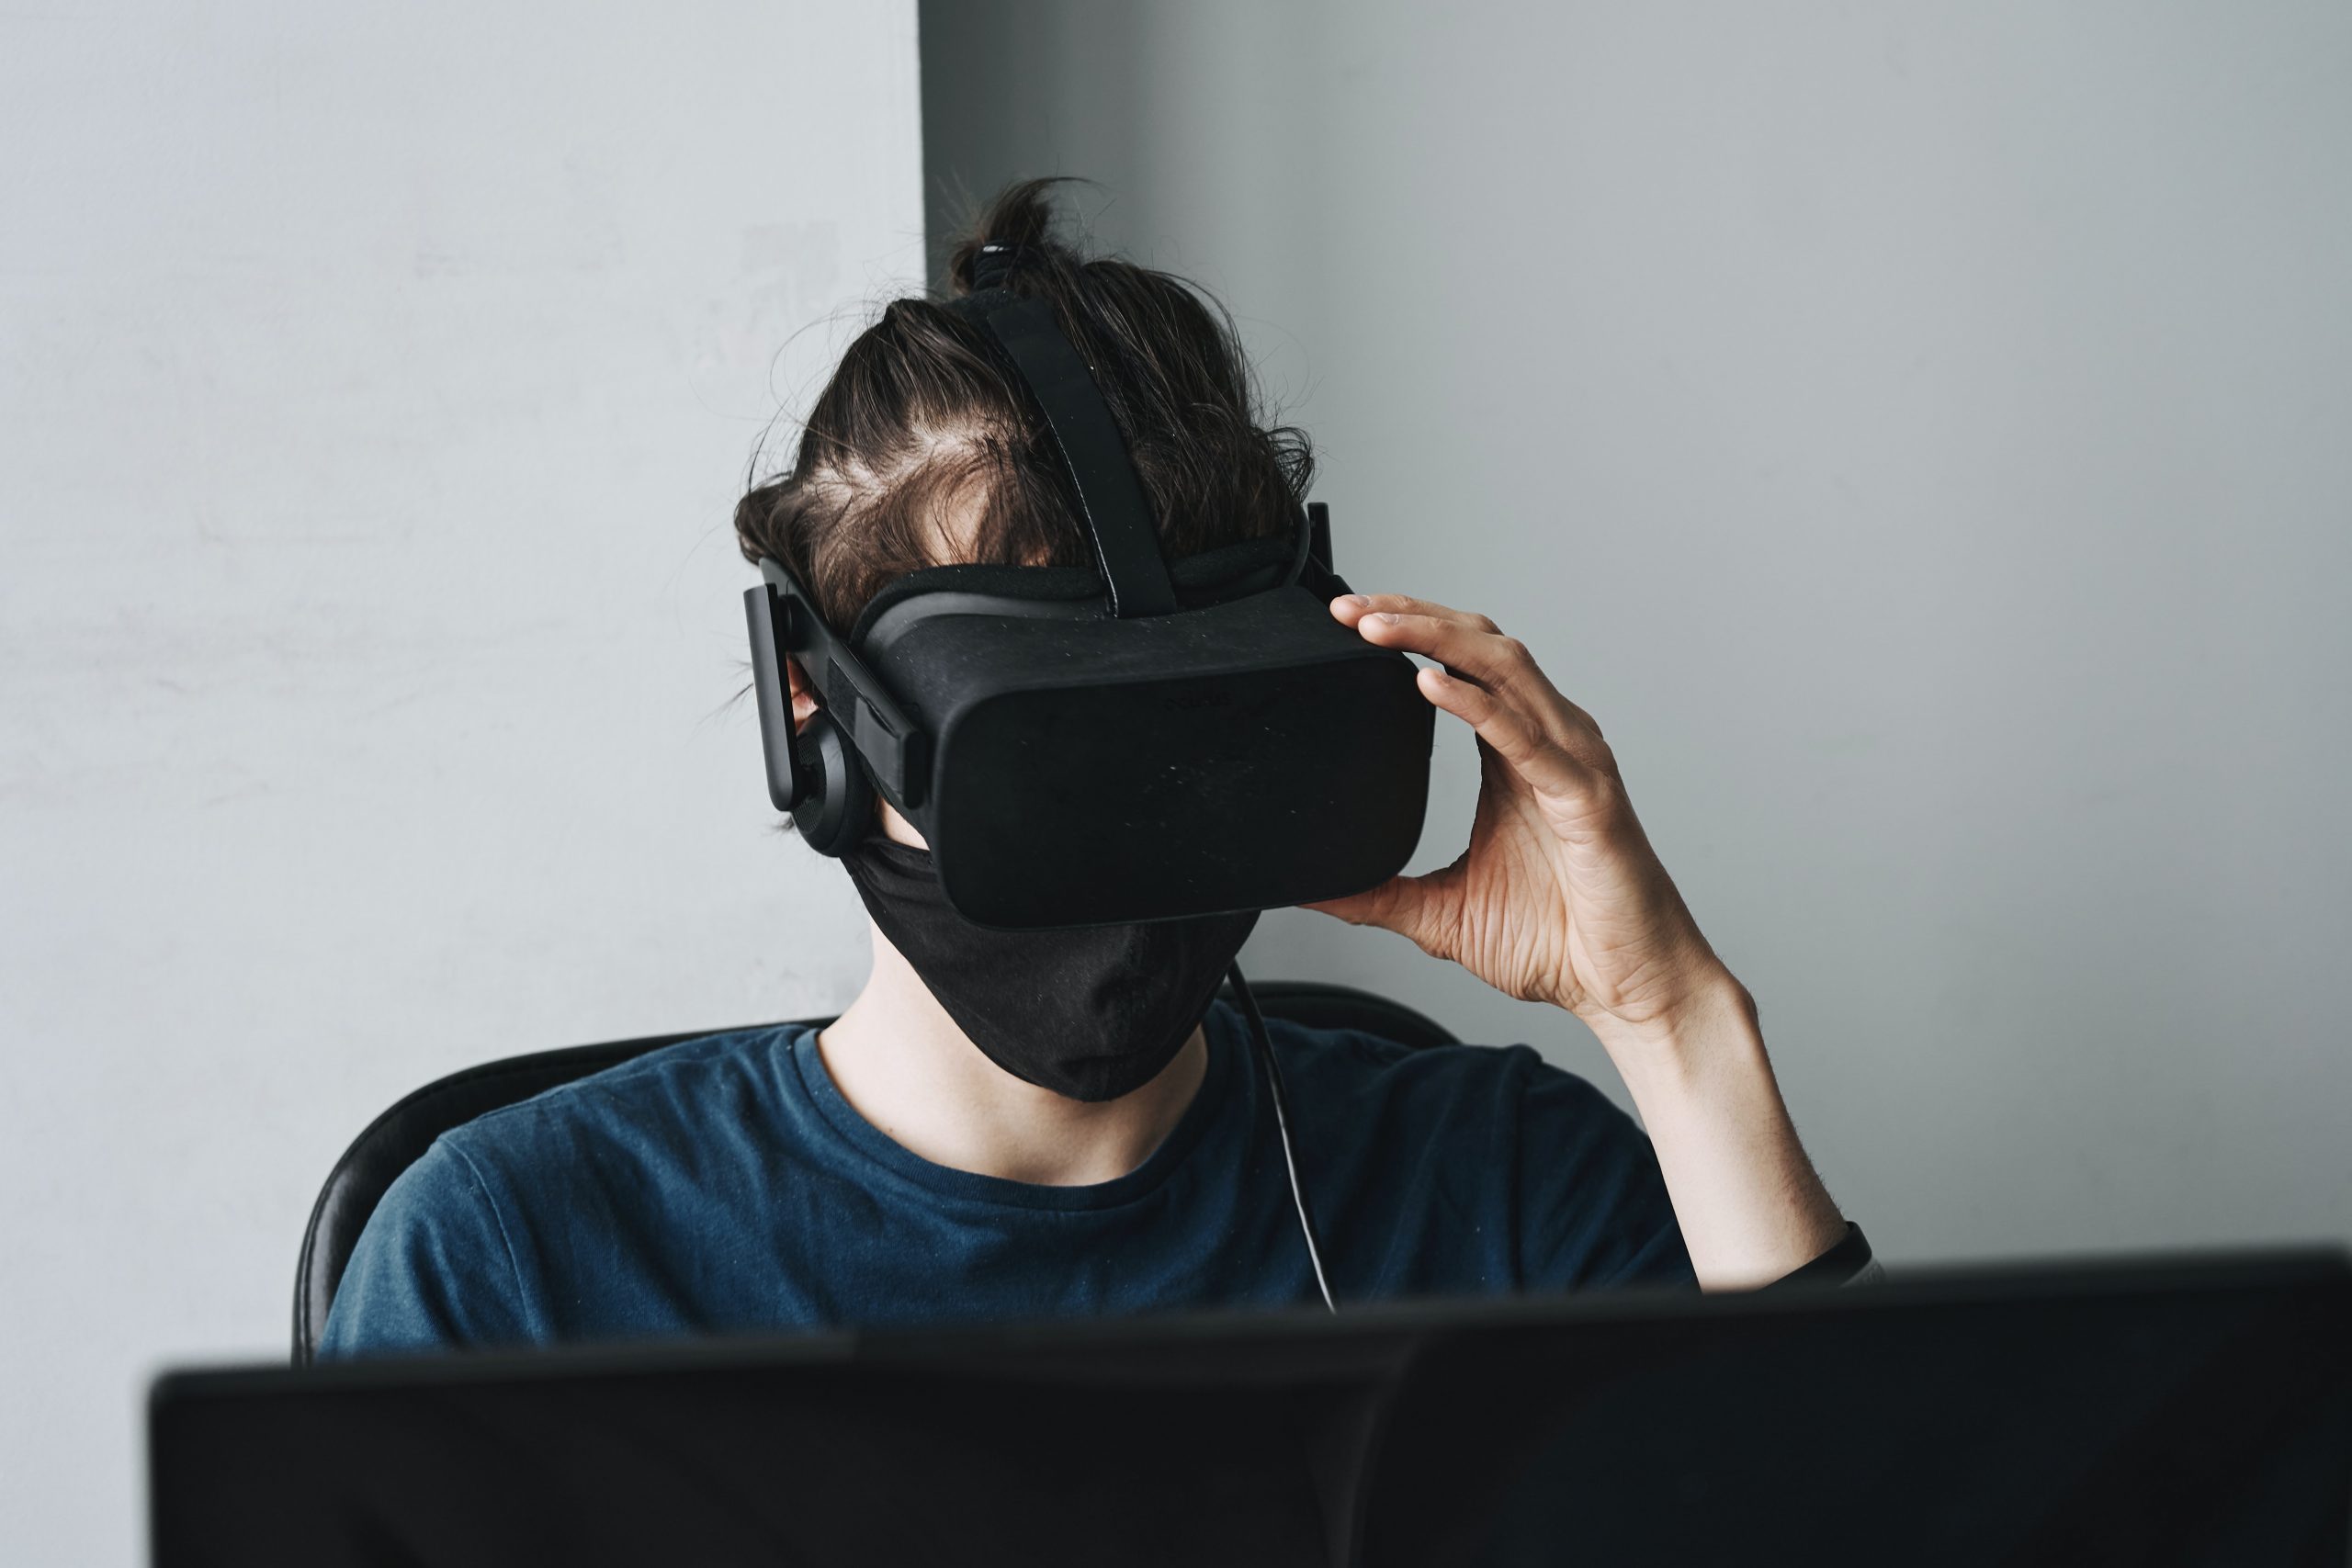 A person wearing VR headset